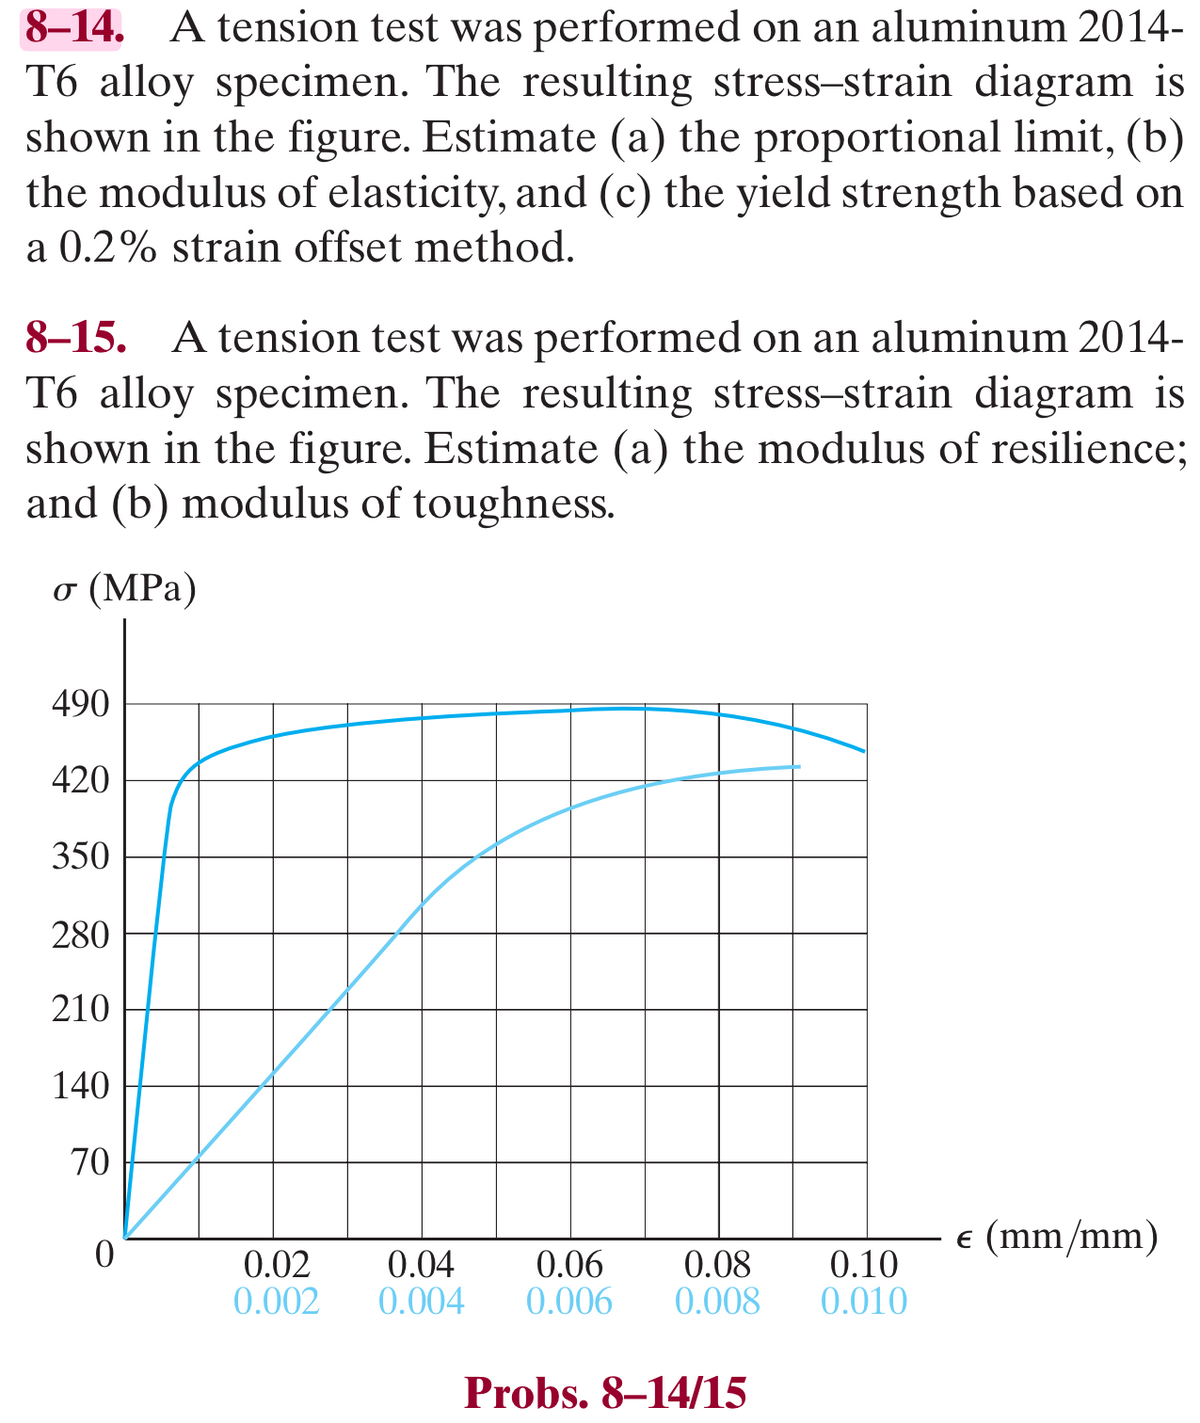 8-14. A tension test was performed on an aluminum 2014-
T6 alloy specimen. The resulting stress-strain diagram is
shown in the figure. Estimate (a) the proportional limit, (b)
the modulus of elasticity, and (c) the yield strength based on
a 0.2% strain offset method.
8-15. A tension test was performed on an aluminum 2014-
T6 alloy specimen. The resulting stress-strain diagram is
shown in the figure. Estimate (a) the modulus of resilience;
and (b) modulus of toughness.
σ (MPa)
490
420
350
280
210
140
70
0
0.08
0.02 0.04 0.06
0.10
0.002 0.004 0.006 0.008 0.010
Probs. 8-14/15
€ (mm/mm)